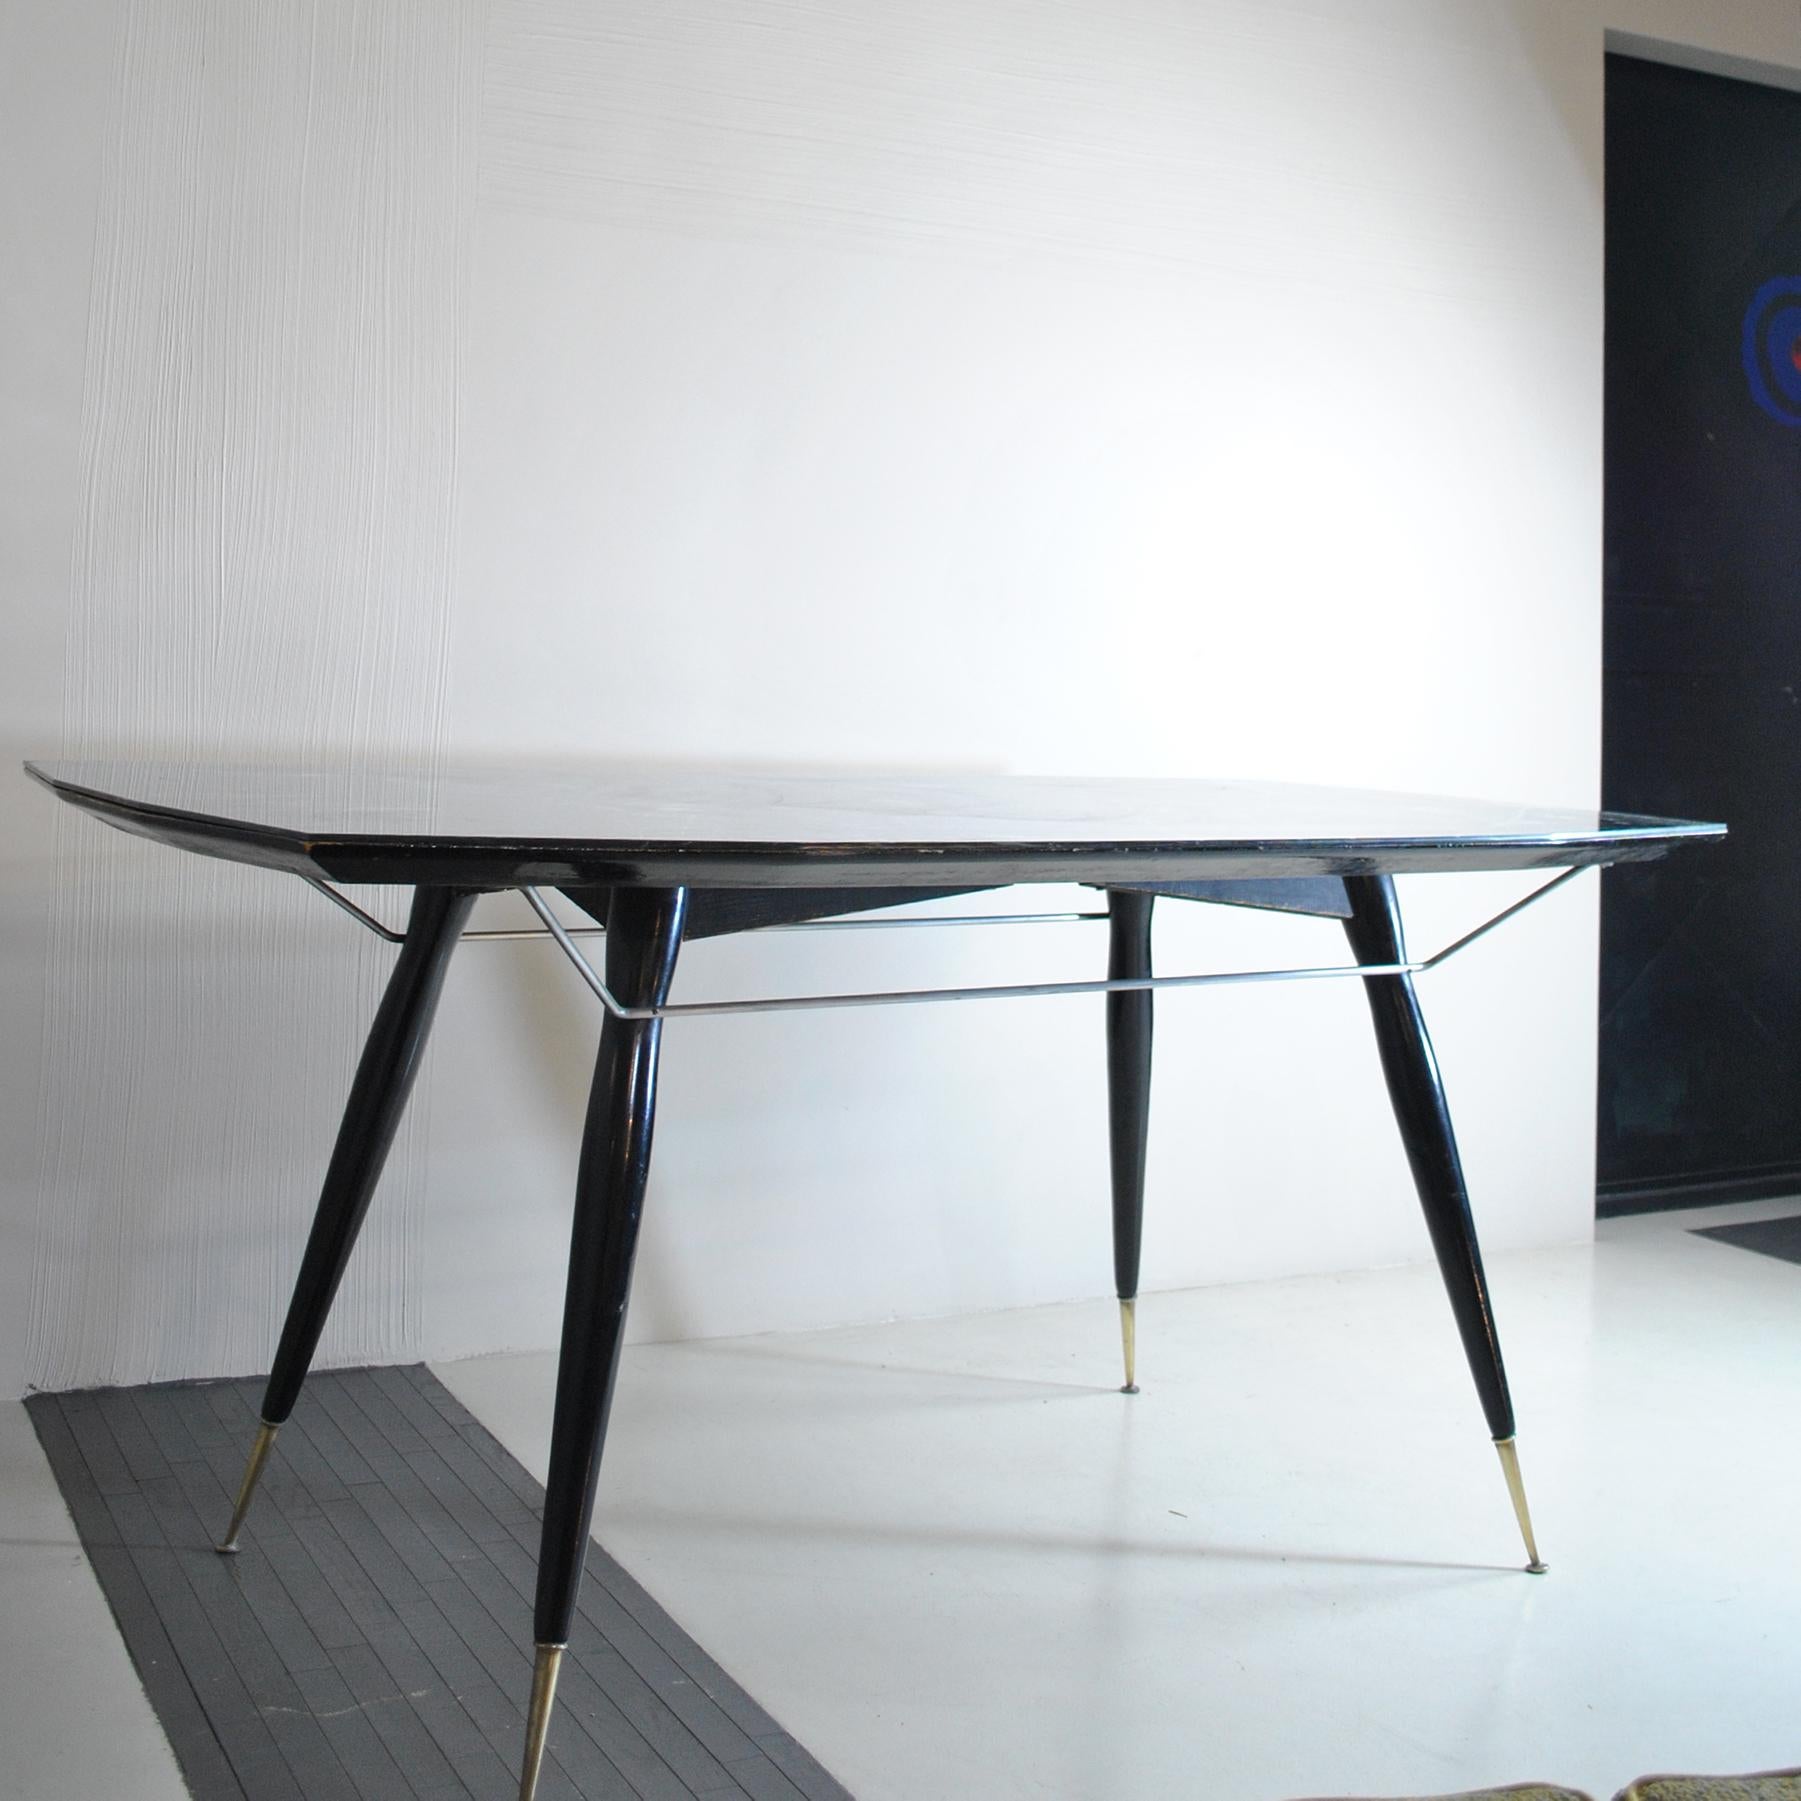 Italian Midcentury Table from the 1960s For Sale 3